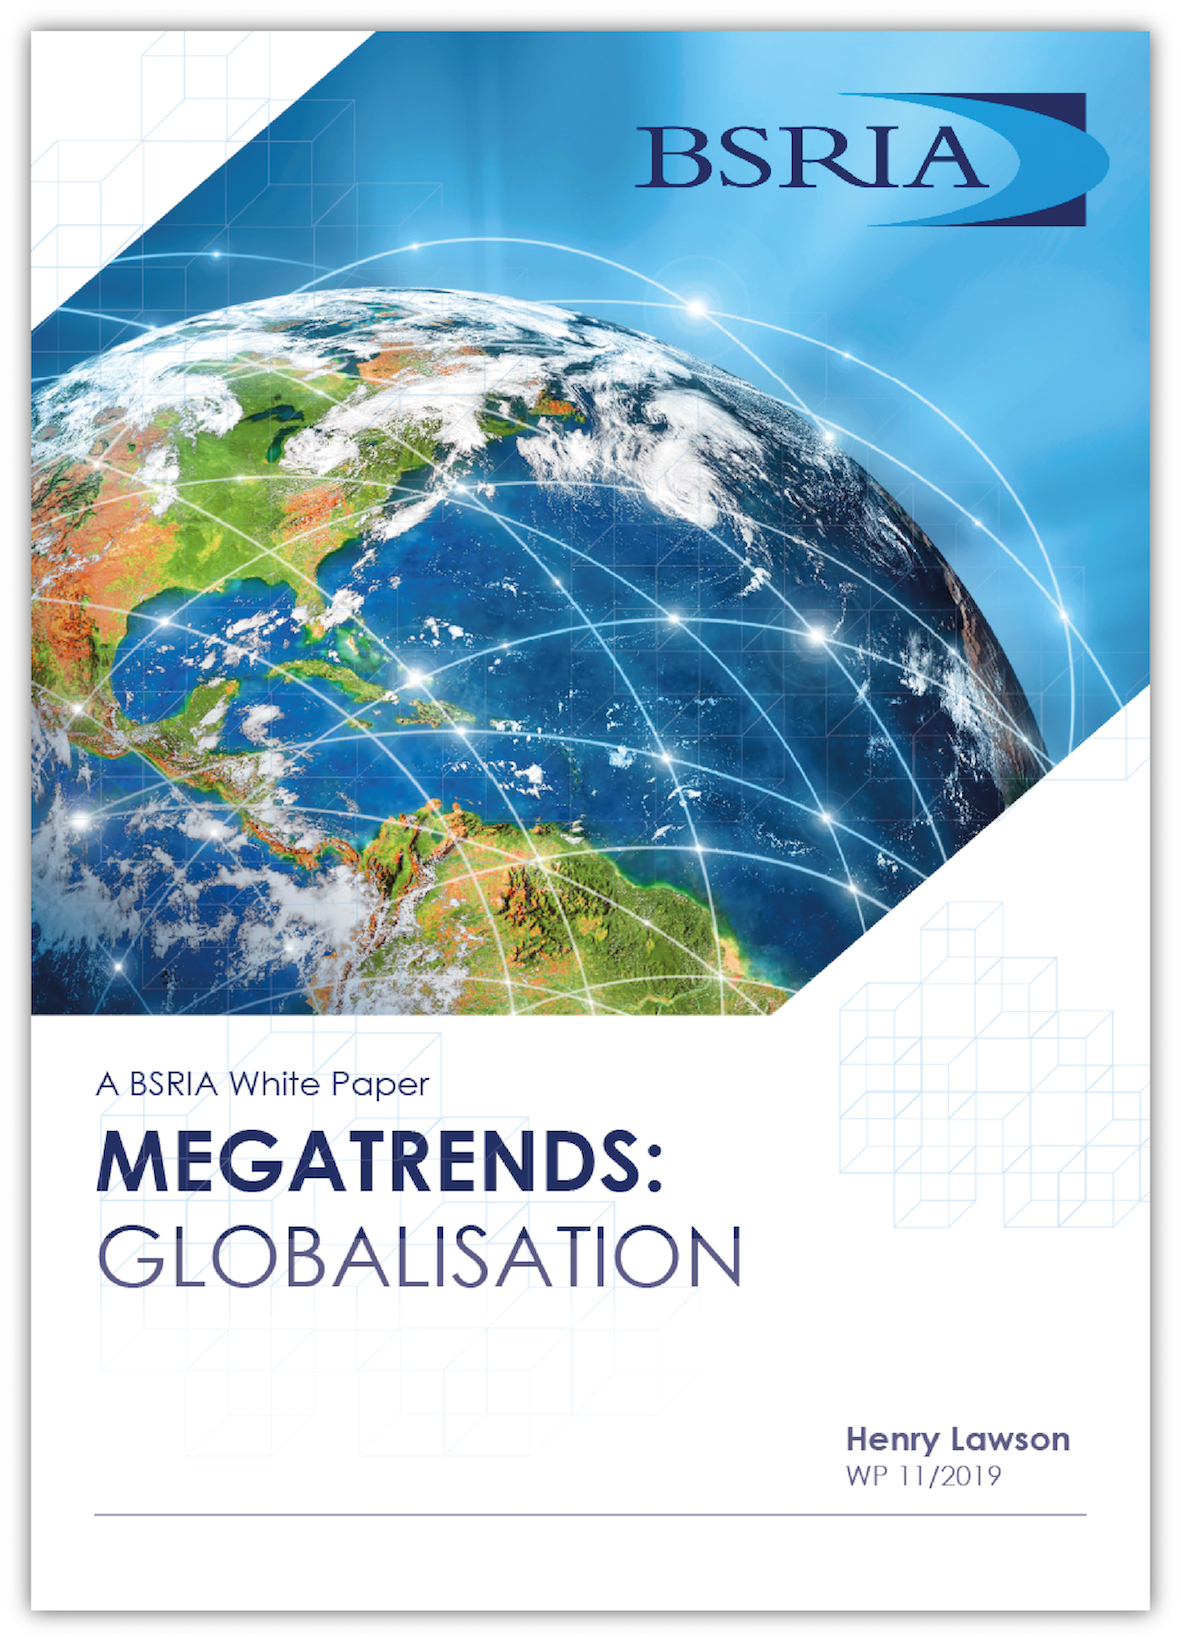 BSRIA launches white paper on ‘megatrends: globalisation’